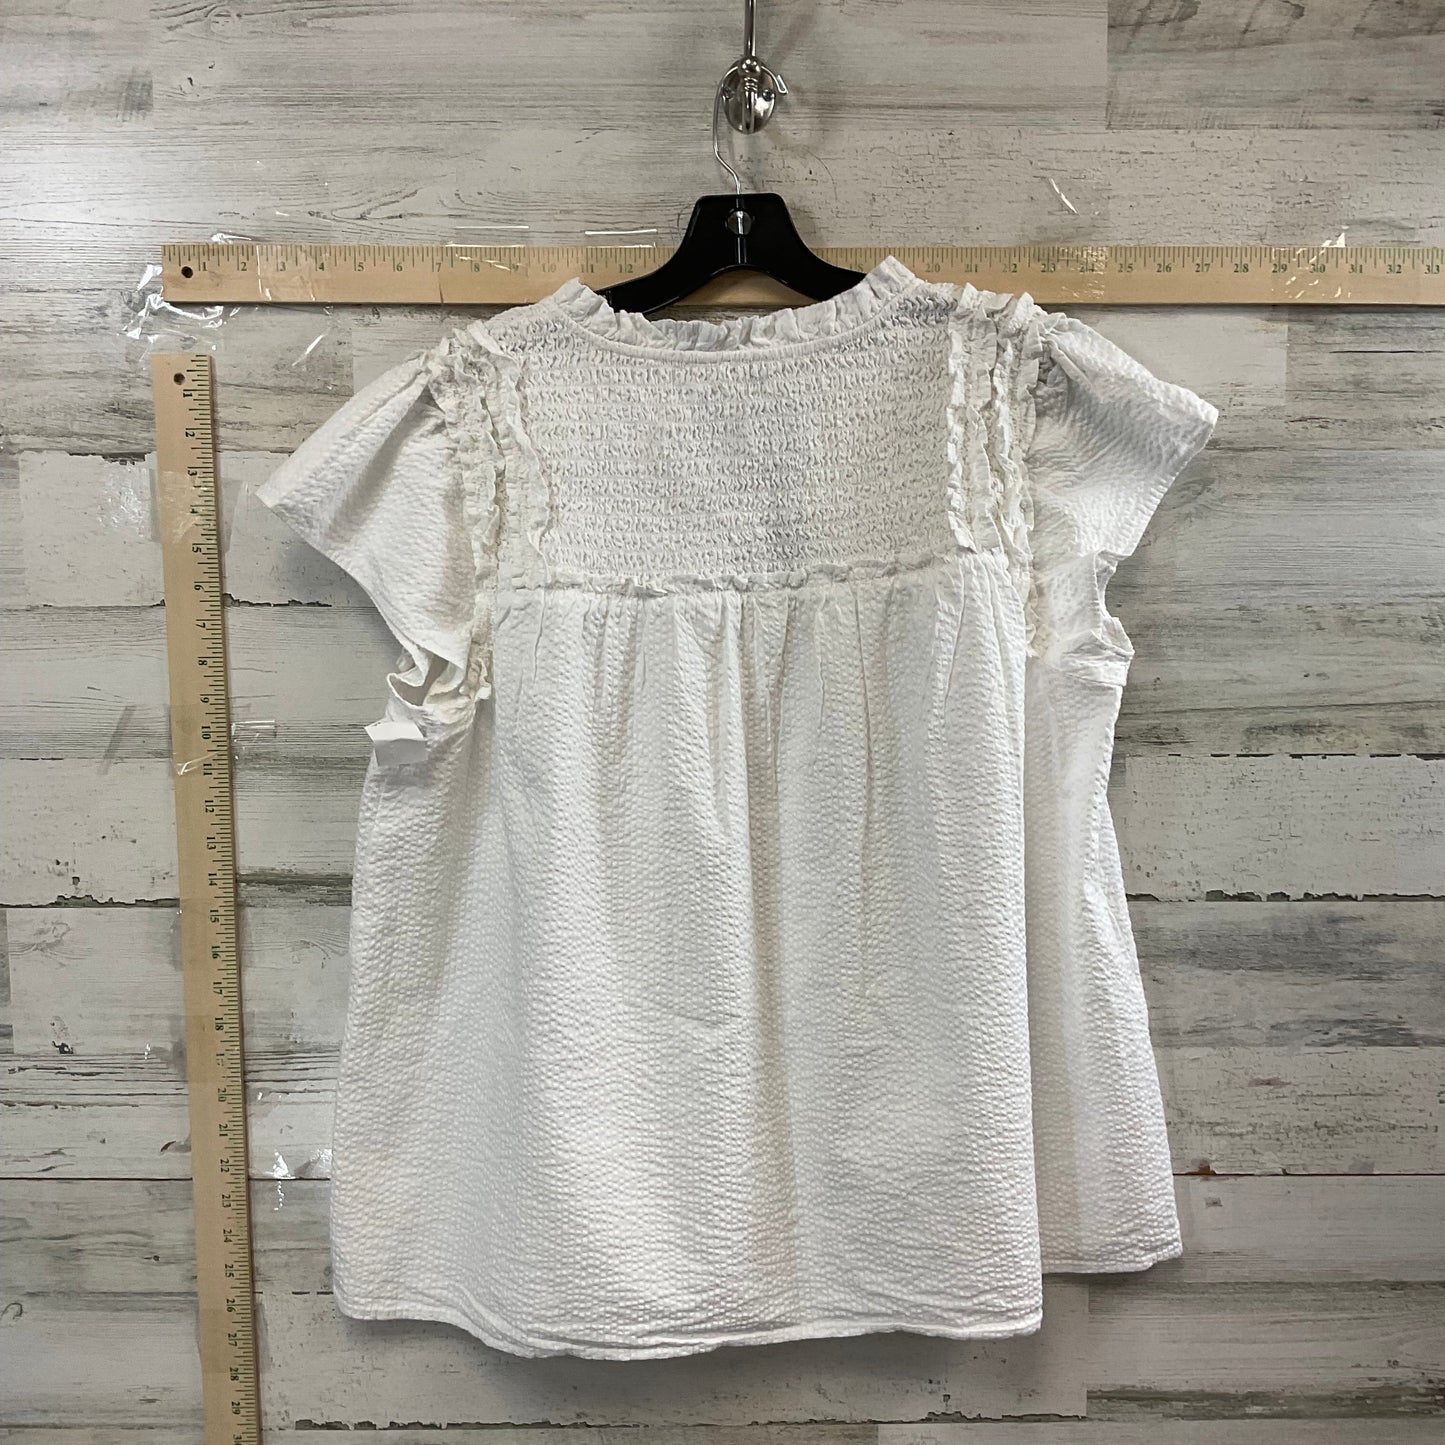 White Top Short Sleeve Crown And Ivy, Size Xxl